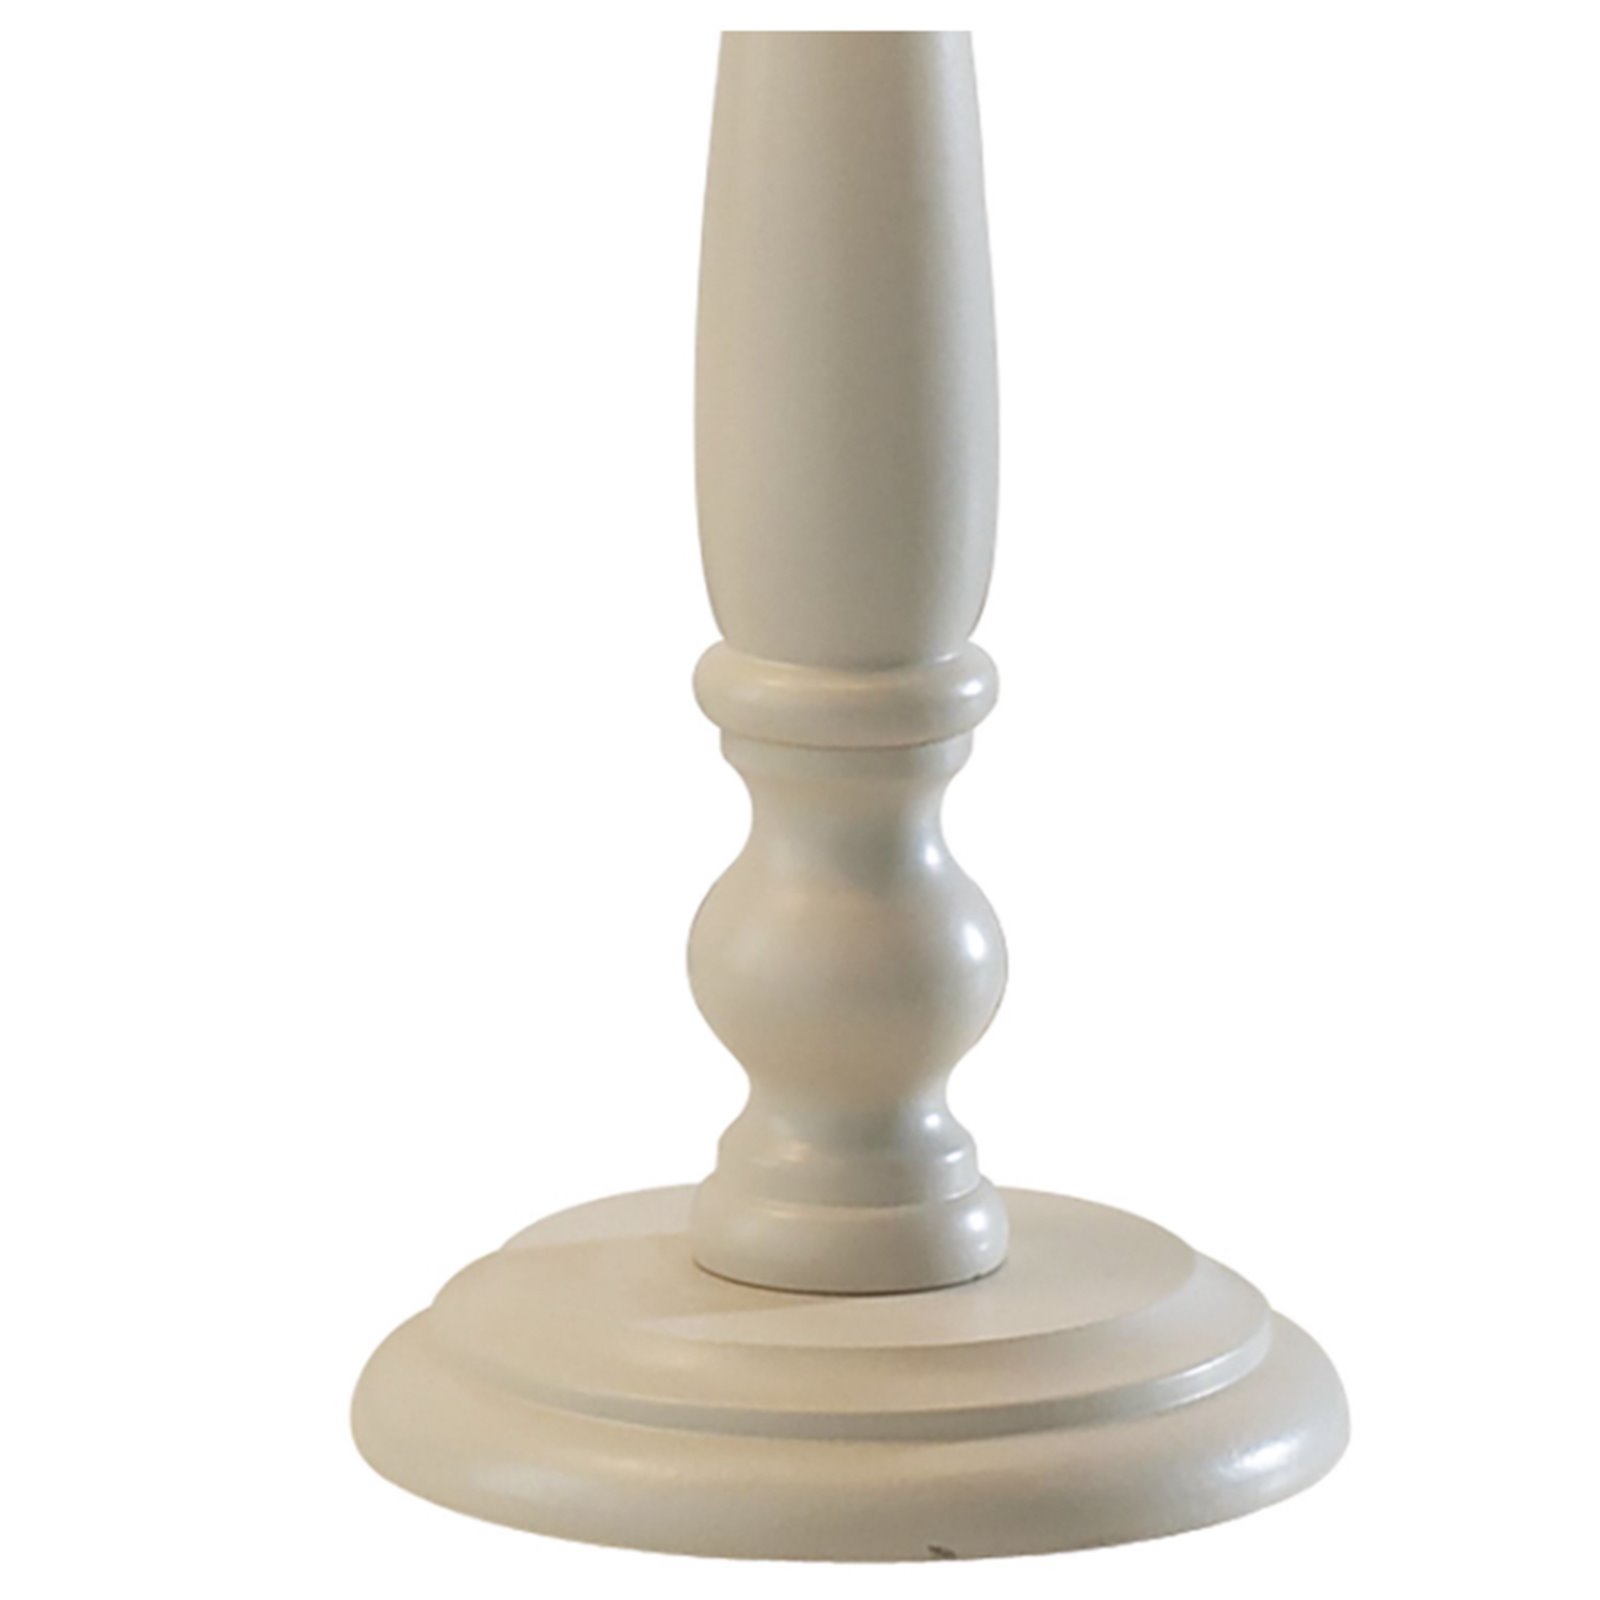 Small Cream Painted Table Lamp Image